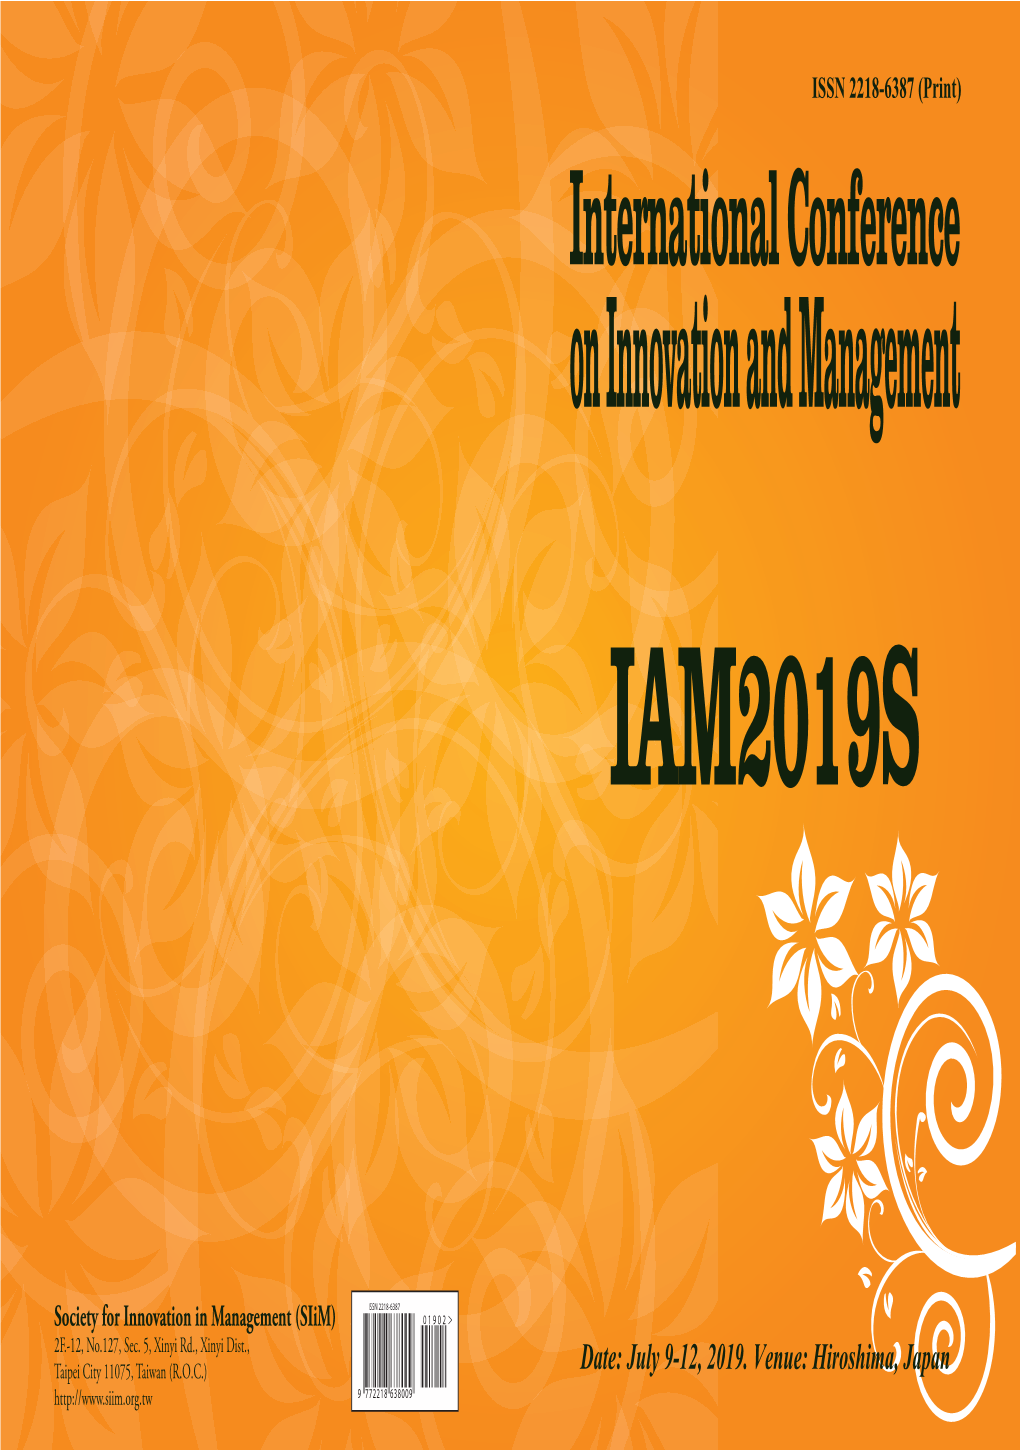 IAM2019 Summer) Are Pleased to Welcome You to This Meeting Held at Hiroshima, Japan on July 9-12, 2019